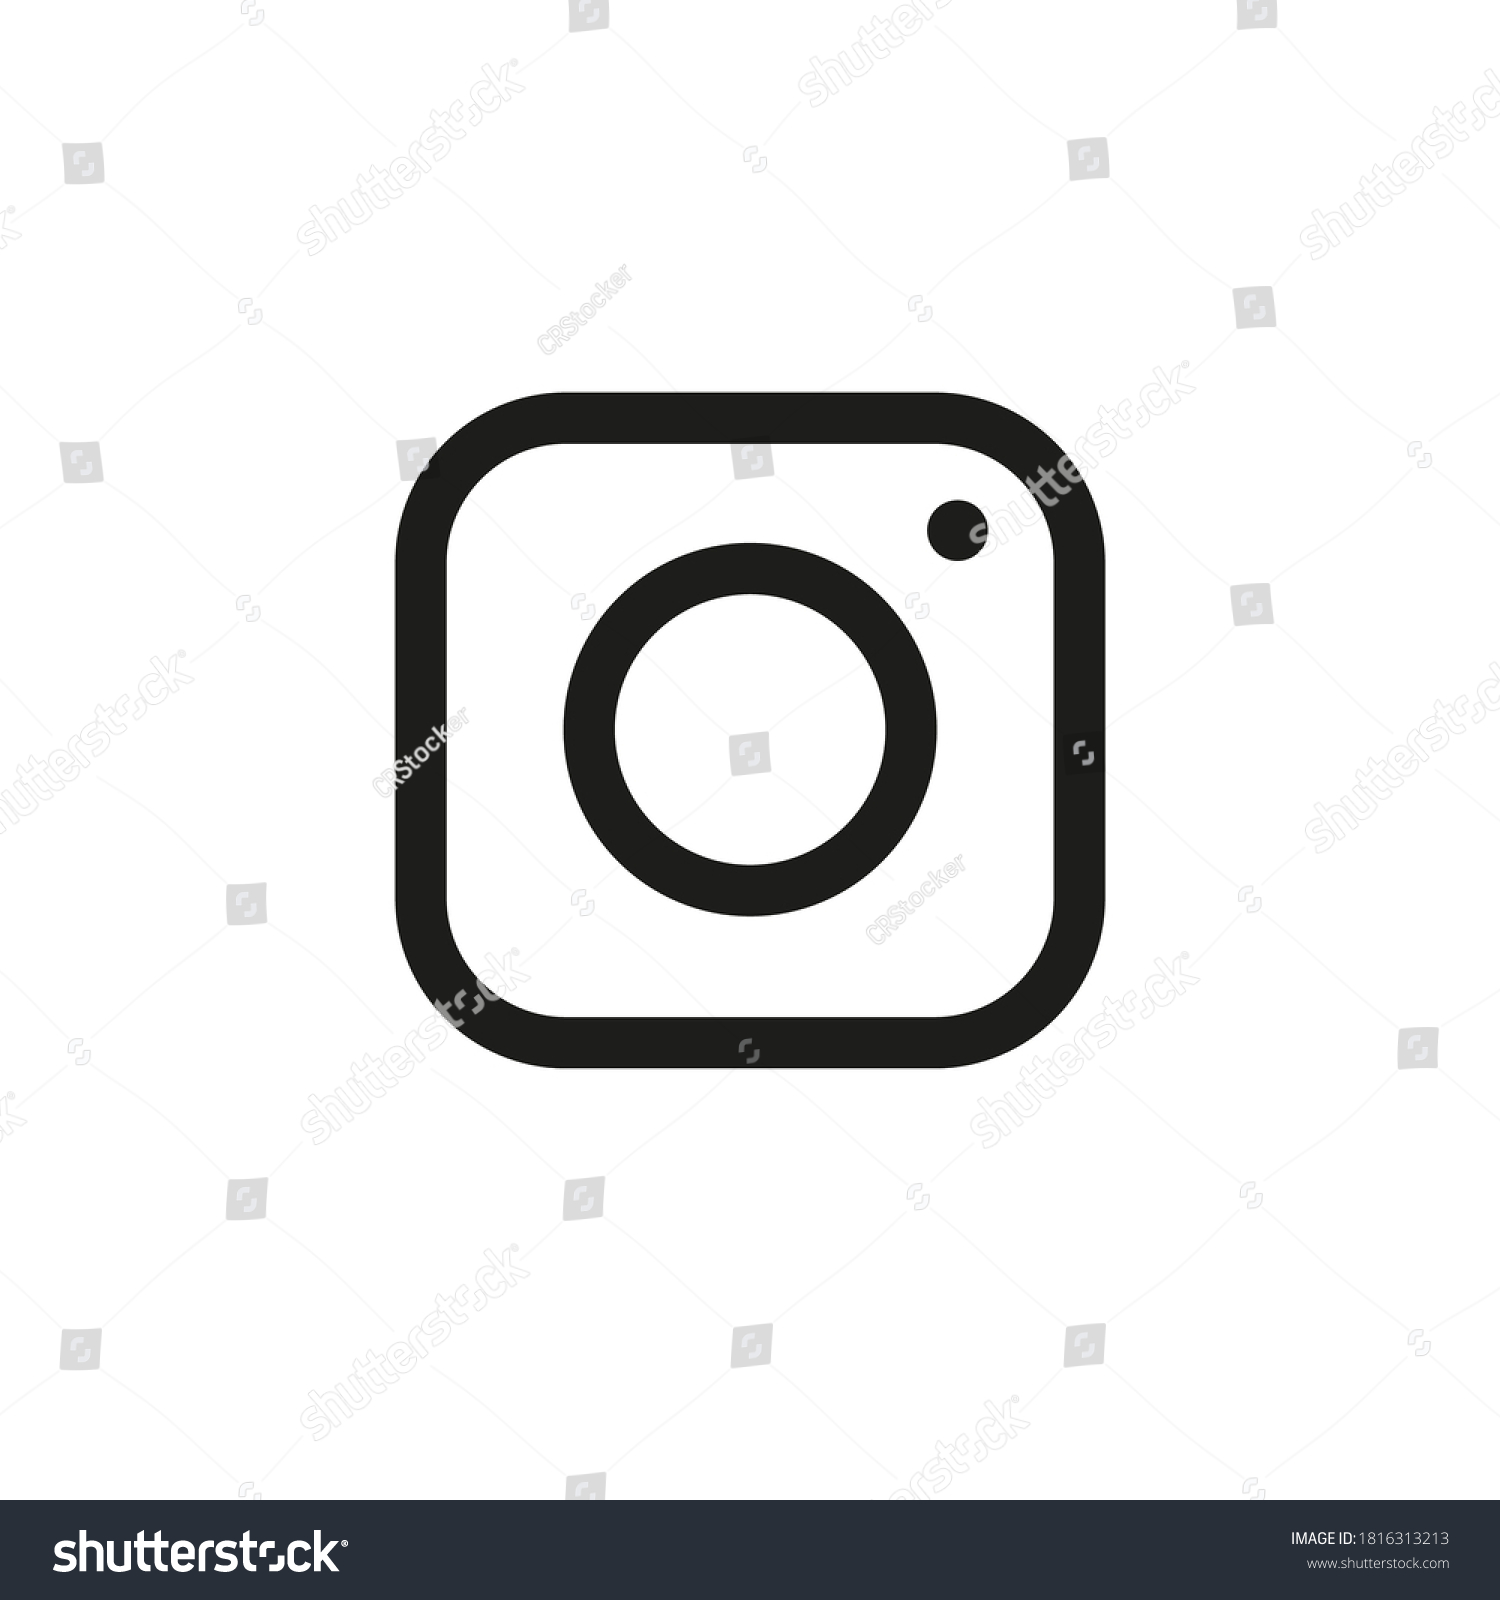 Camera icon simple style Isolated vector illustration on white background. #1816313213